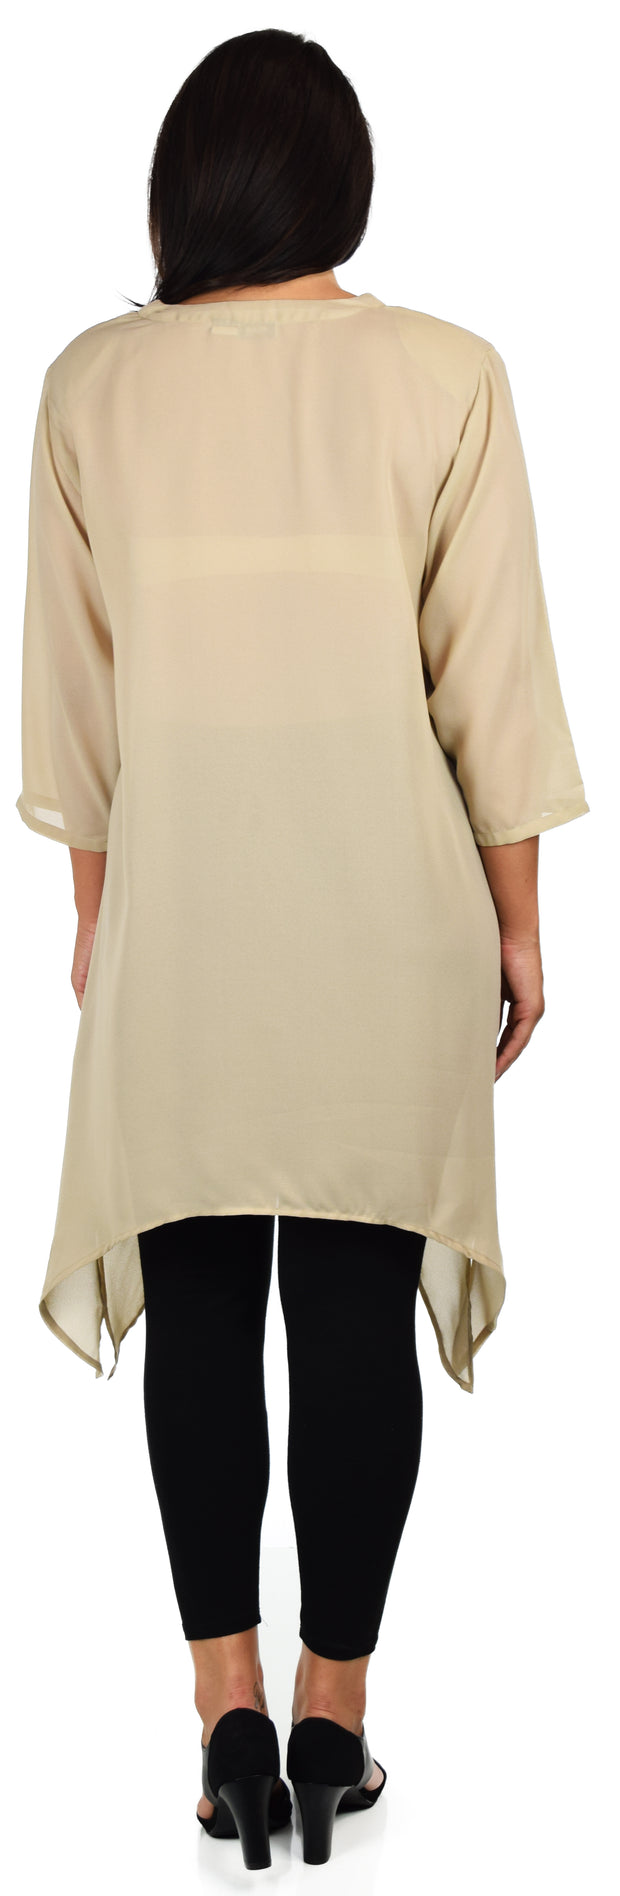 Comfy Georgette Tunic, Asymmetrical Plus size Tunic, Fish tail Tunic, Plus size top with side pockets